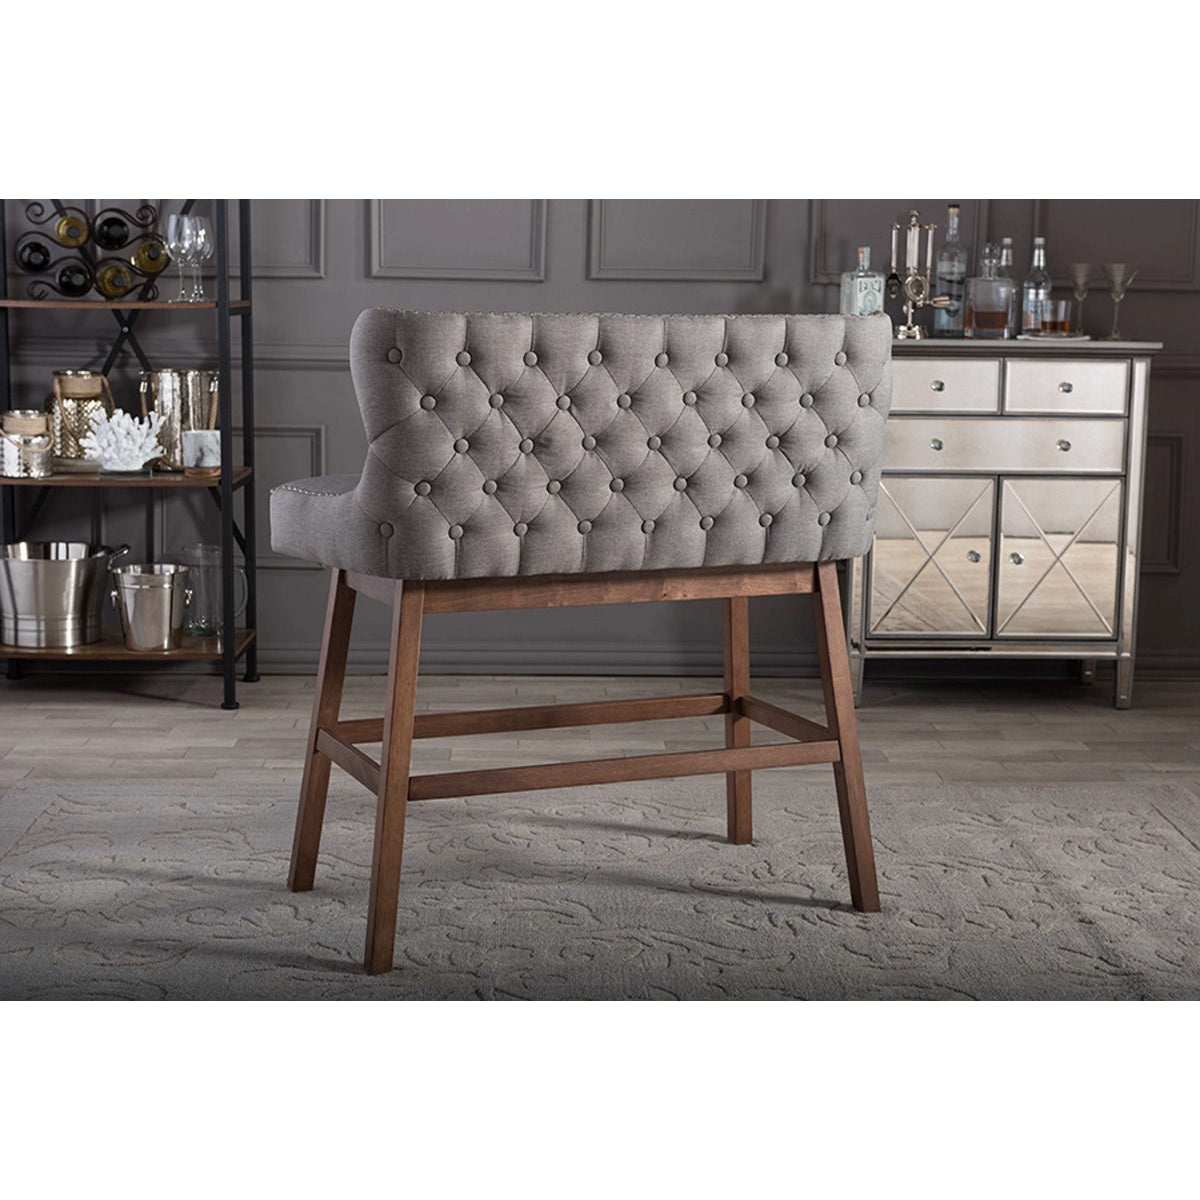 Baxton Studio Gradisca Modern and Contemporary Grey Fabric Button-tufted Upholstered Bar Bench Banquette Baxton Studio-Bar Stools-Minimal And Modern - 5